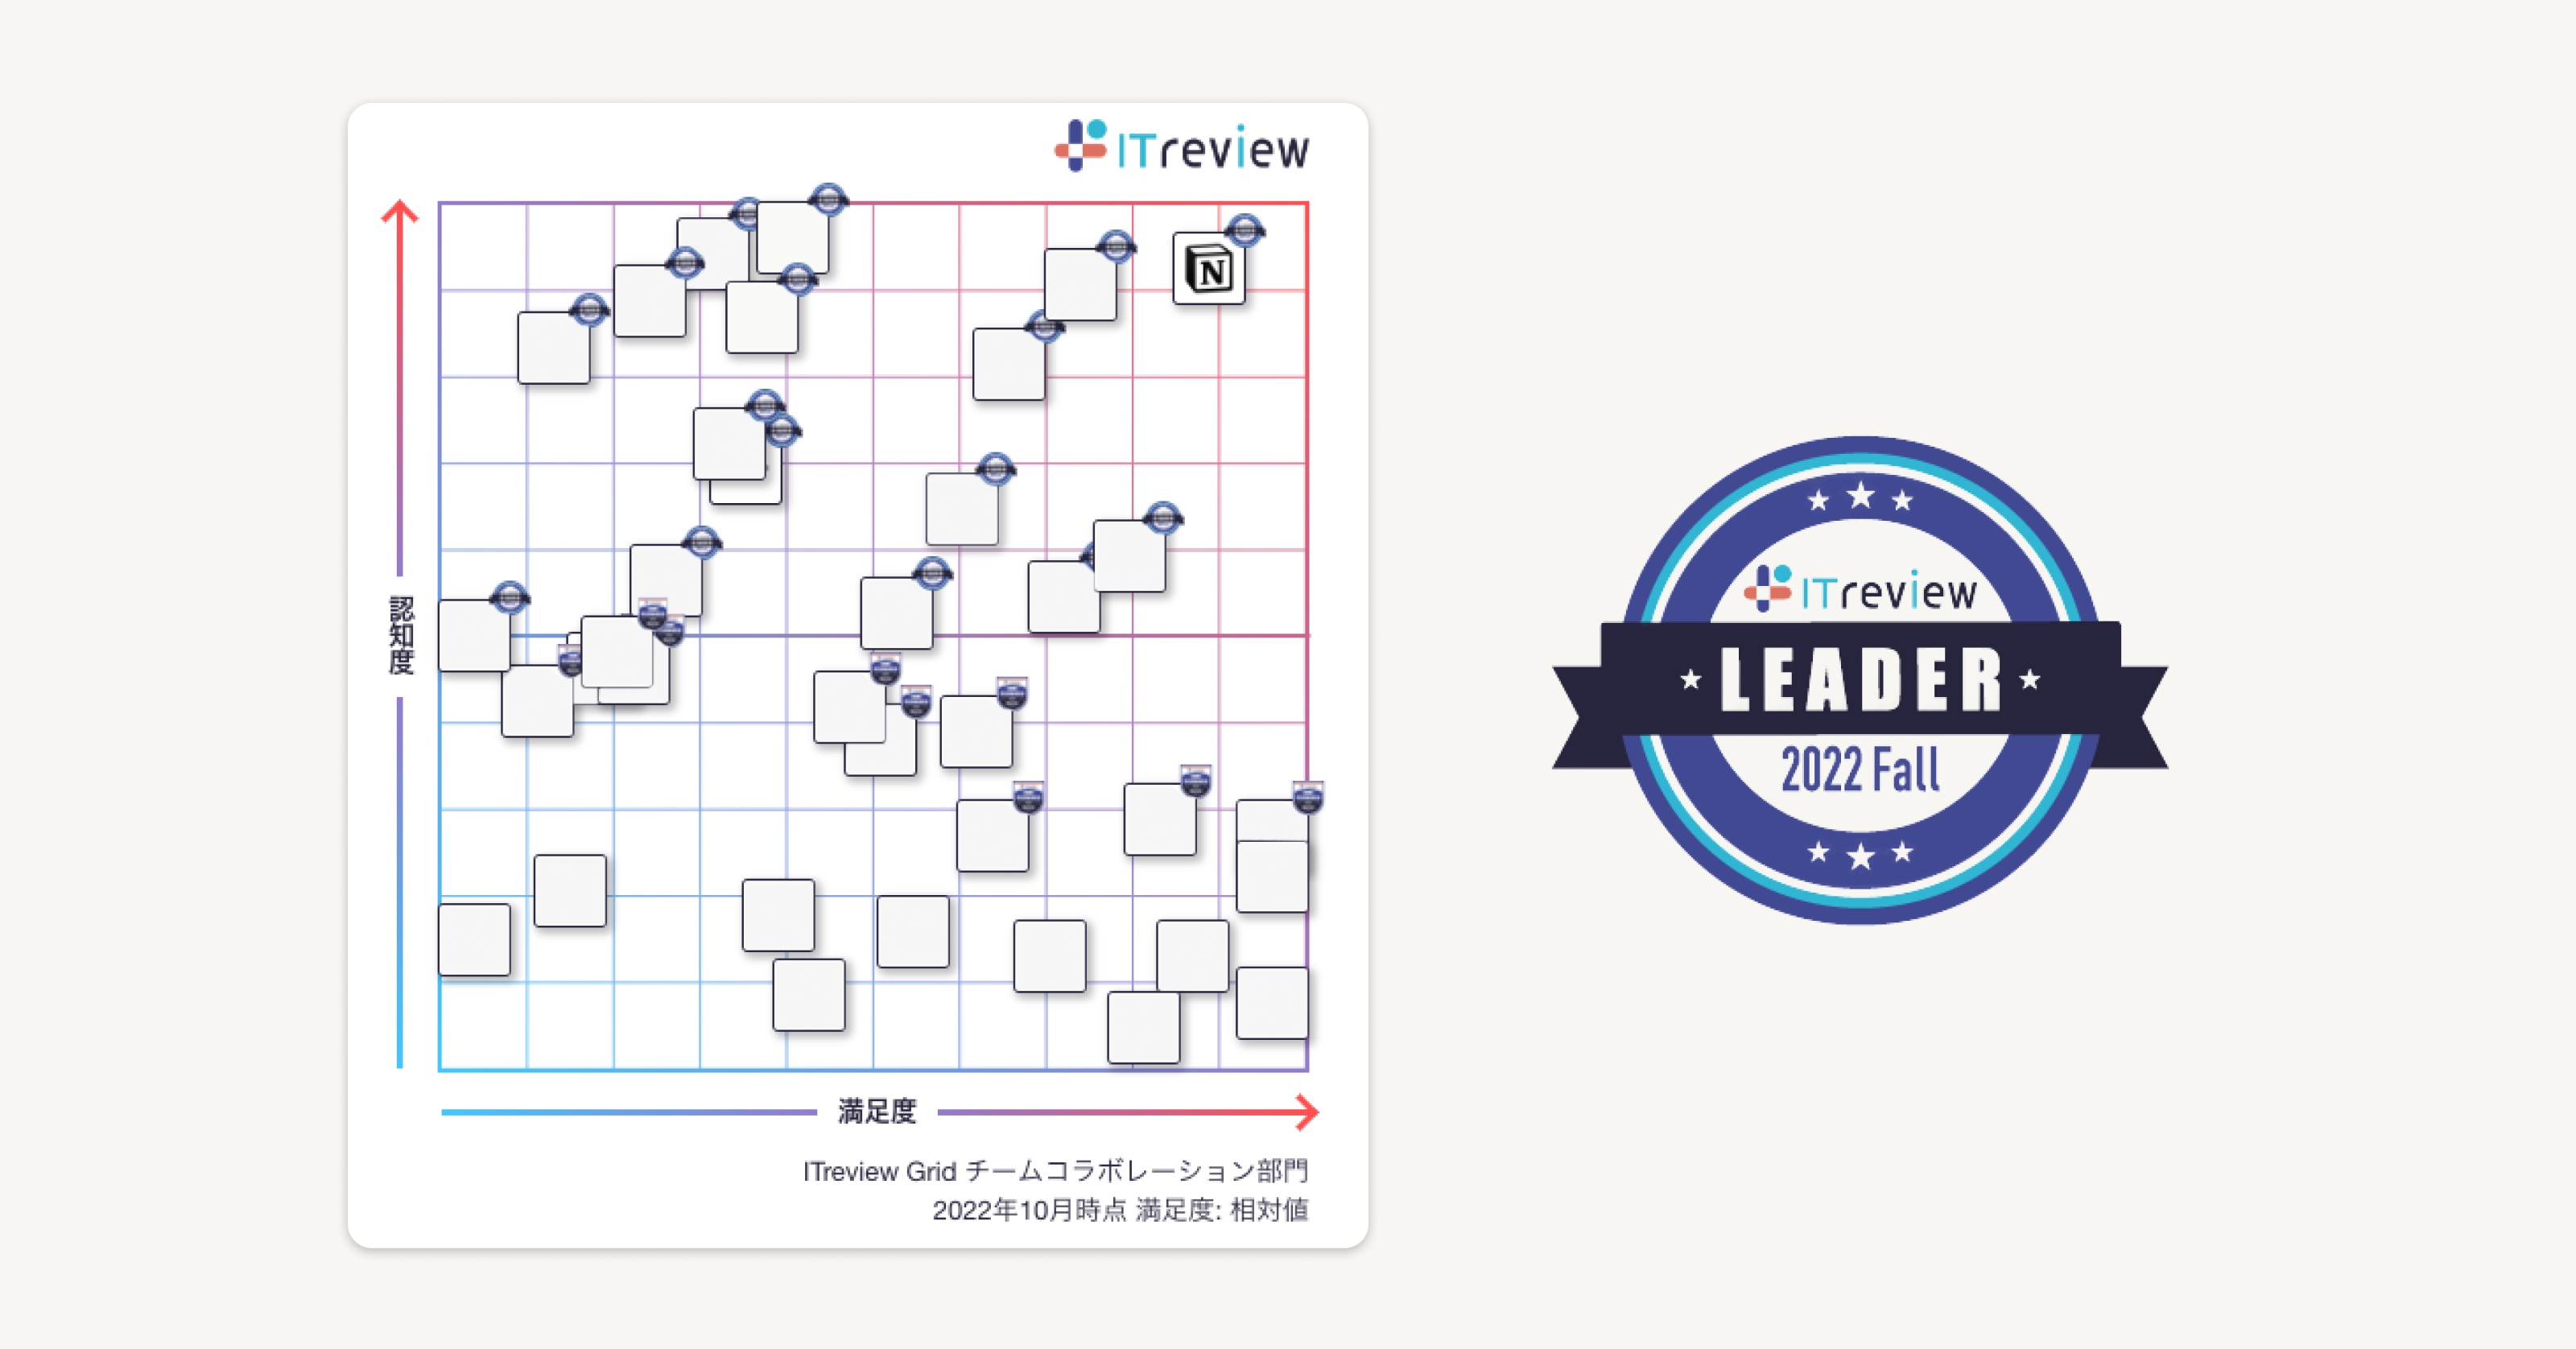 ITreview Grid Awardのチームコラボレーション部門で「Leader」に選出